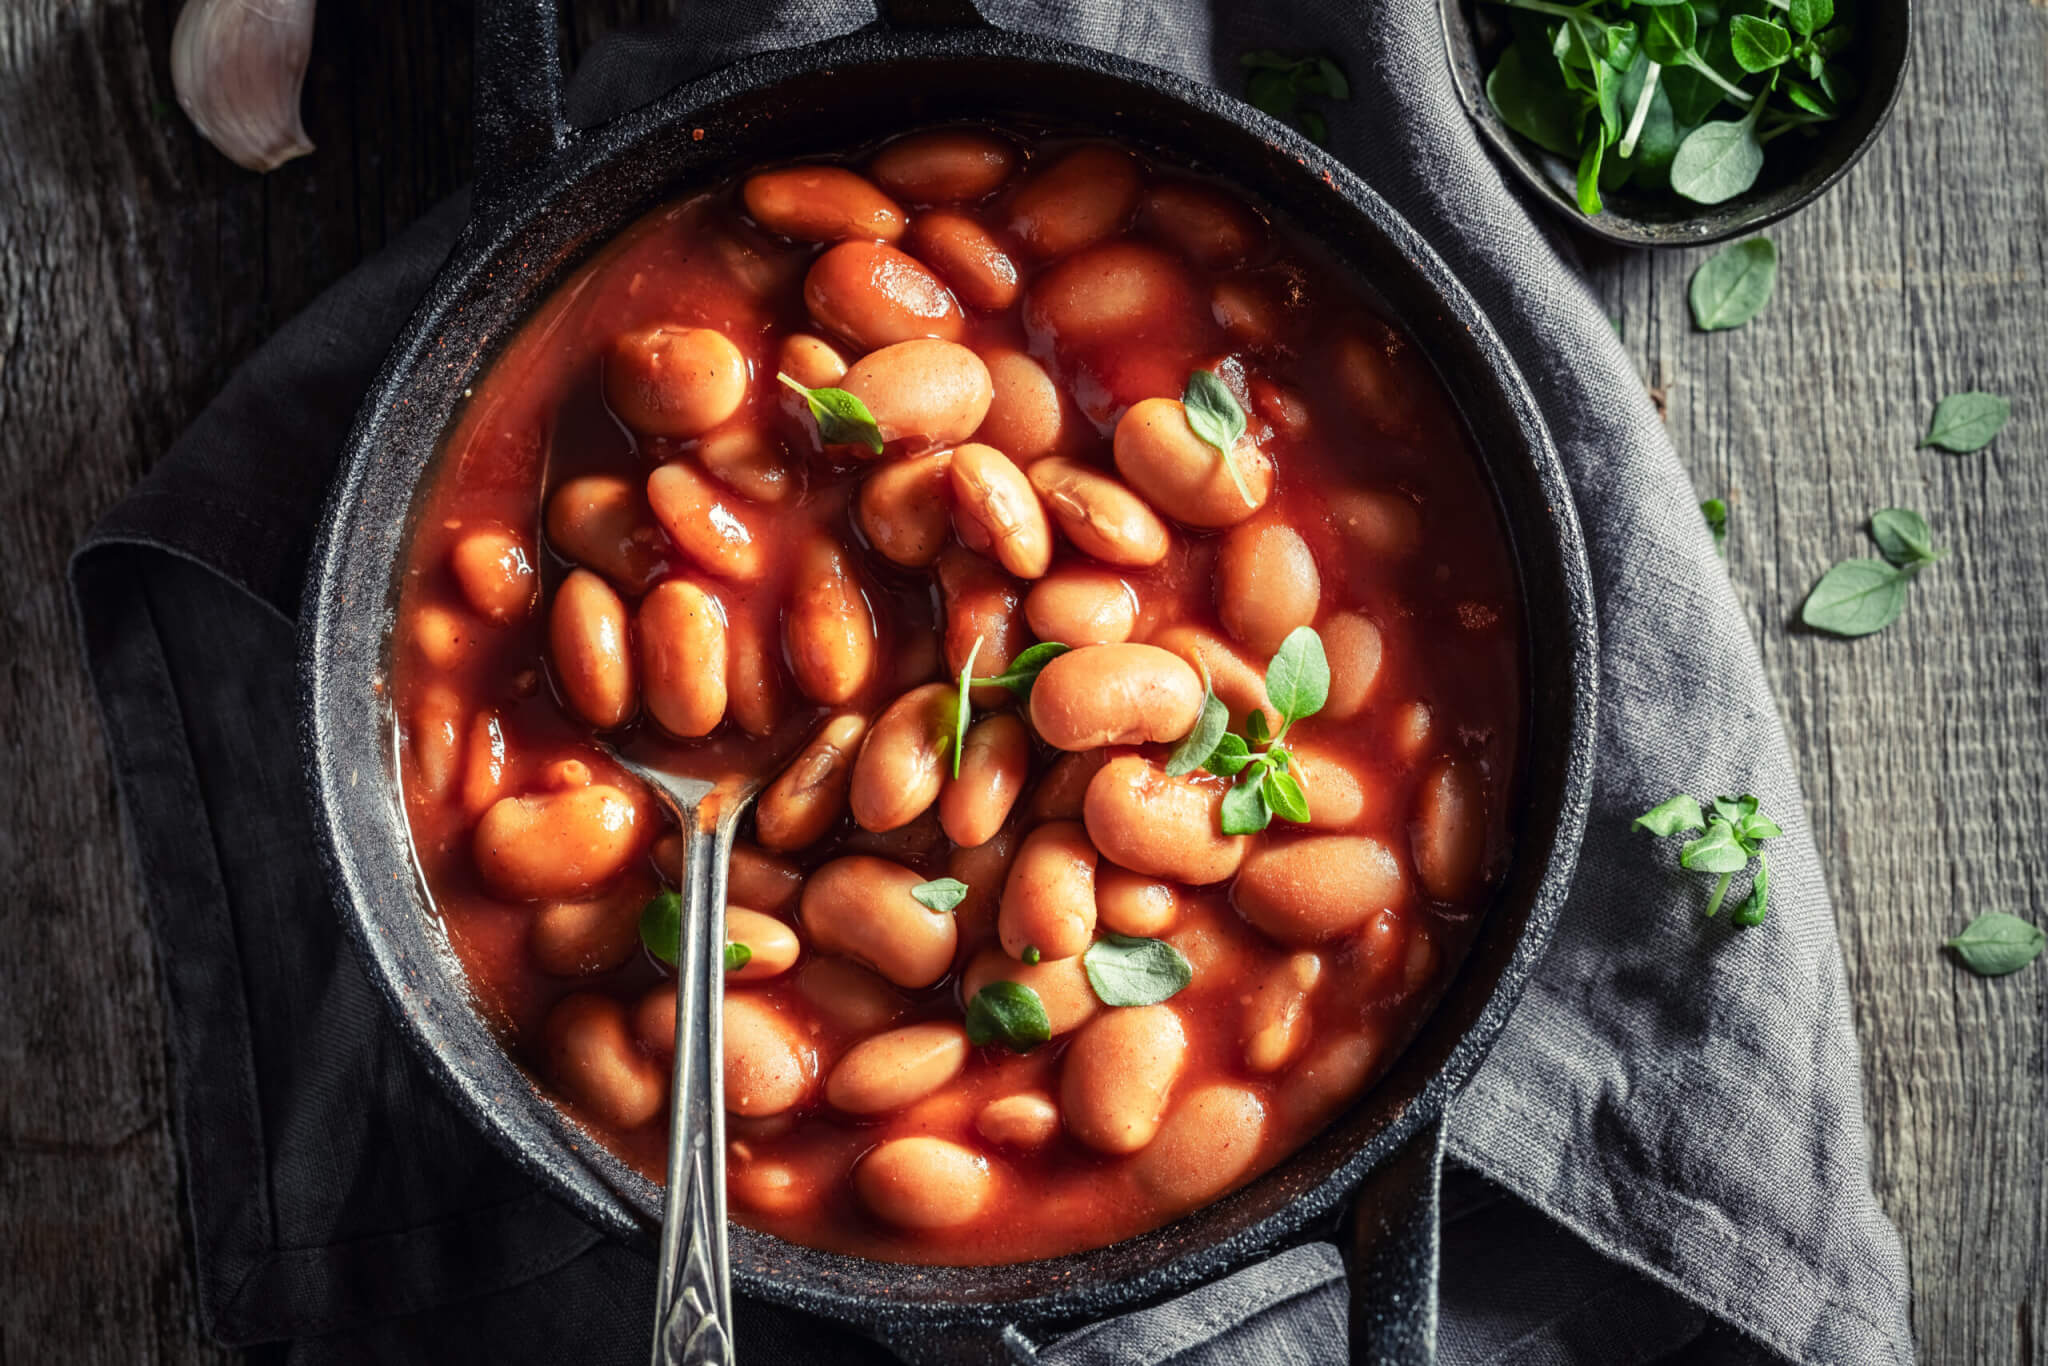 Tasty baked beans with garlic and fresh tomatoes